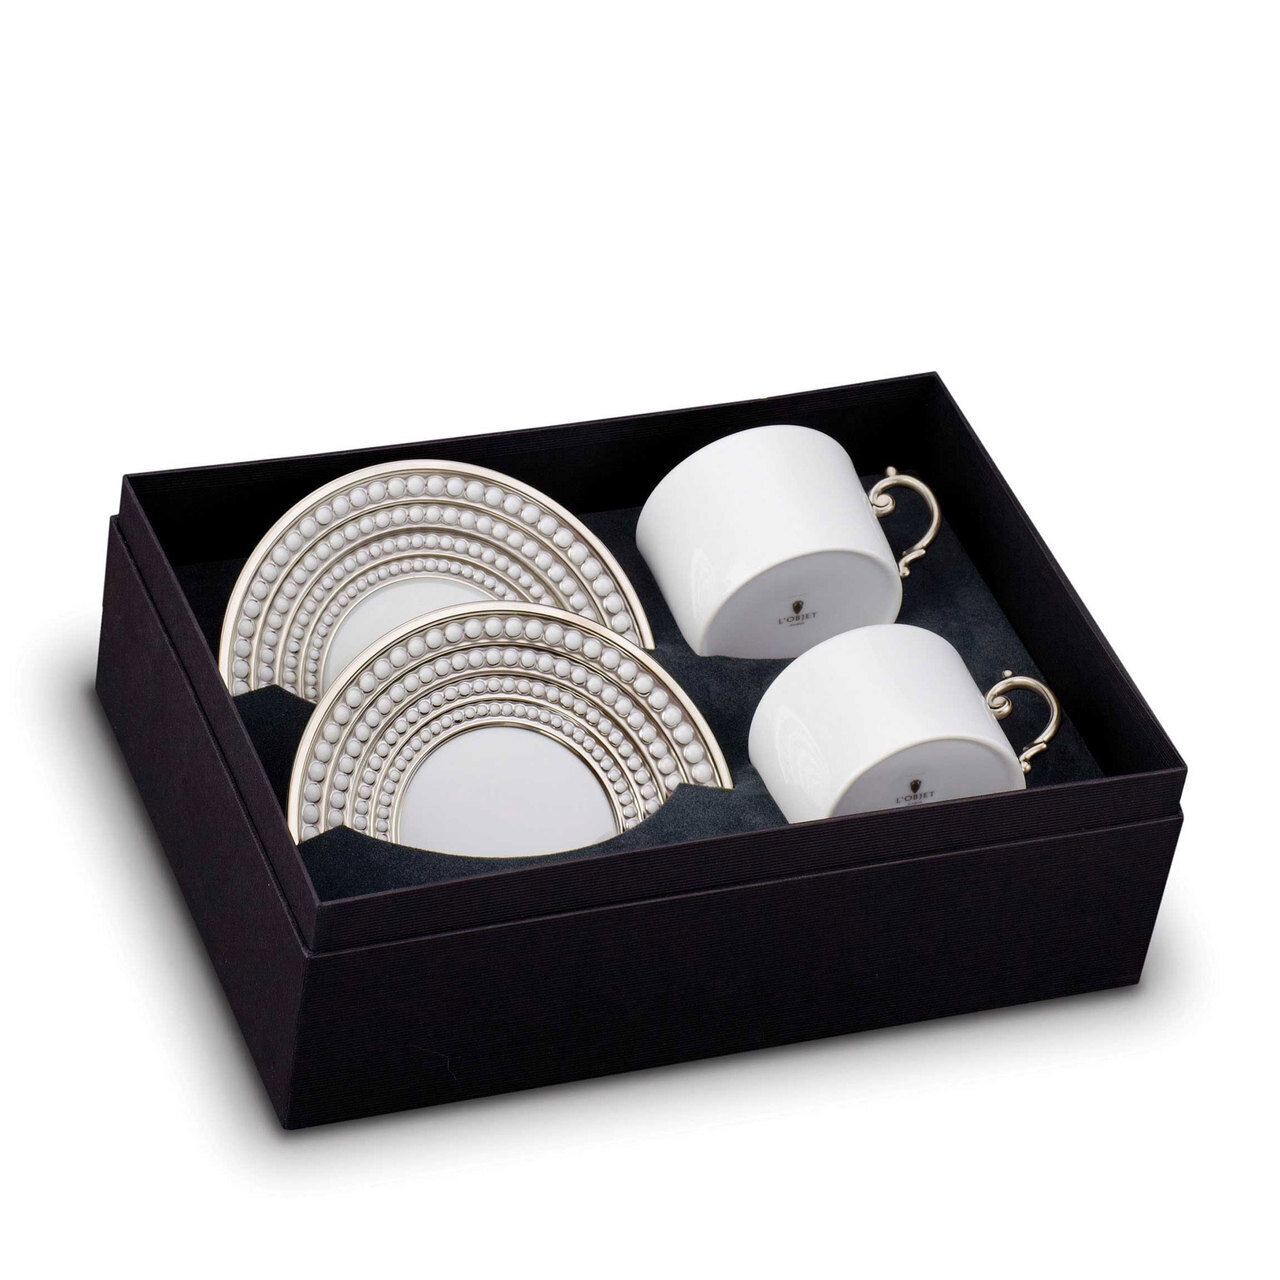 L'Objet Perlee Tea Cup and Saucer Gift Box of 2 Platinum